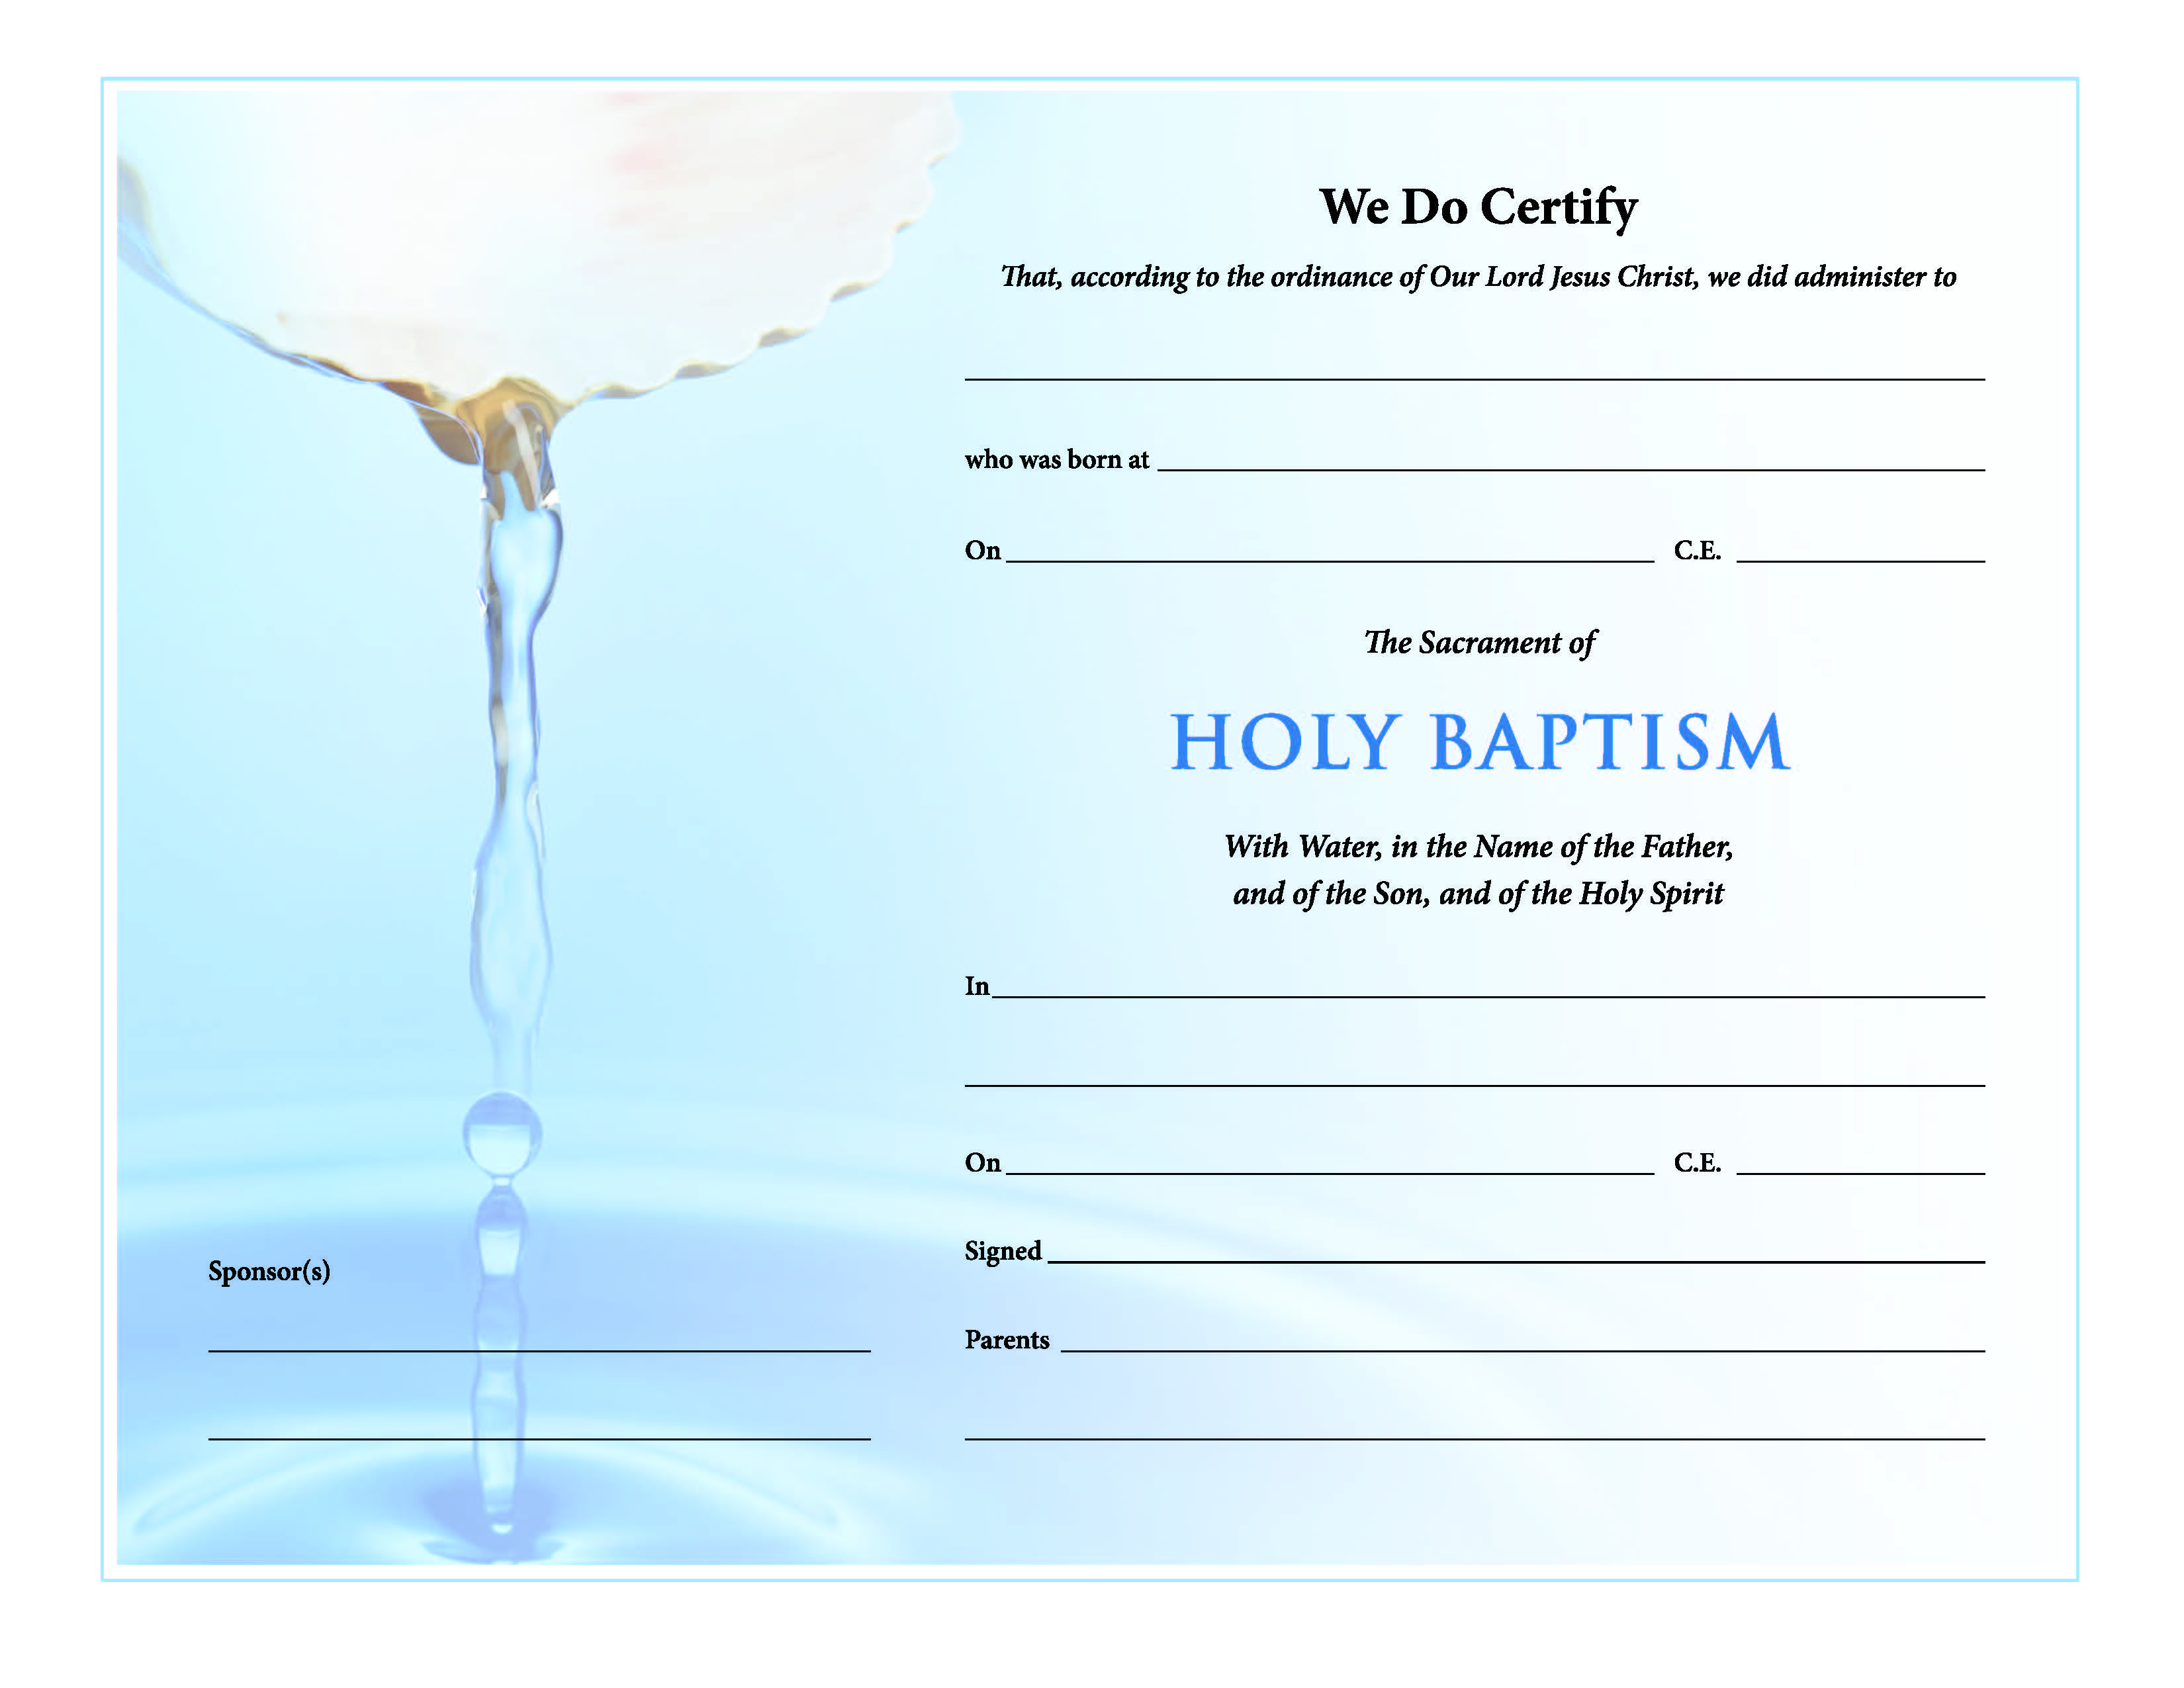 ChurchPublishing.org: Holy Baptism Certificate - Download With Christian Baptism Certificate Template